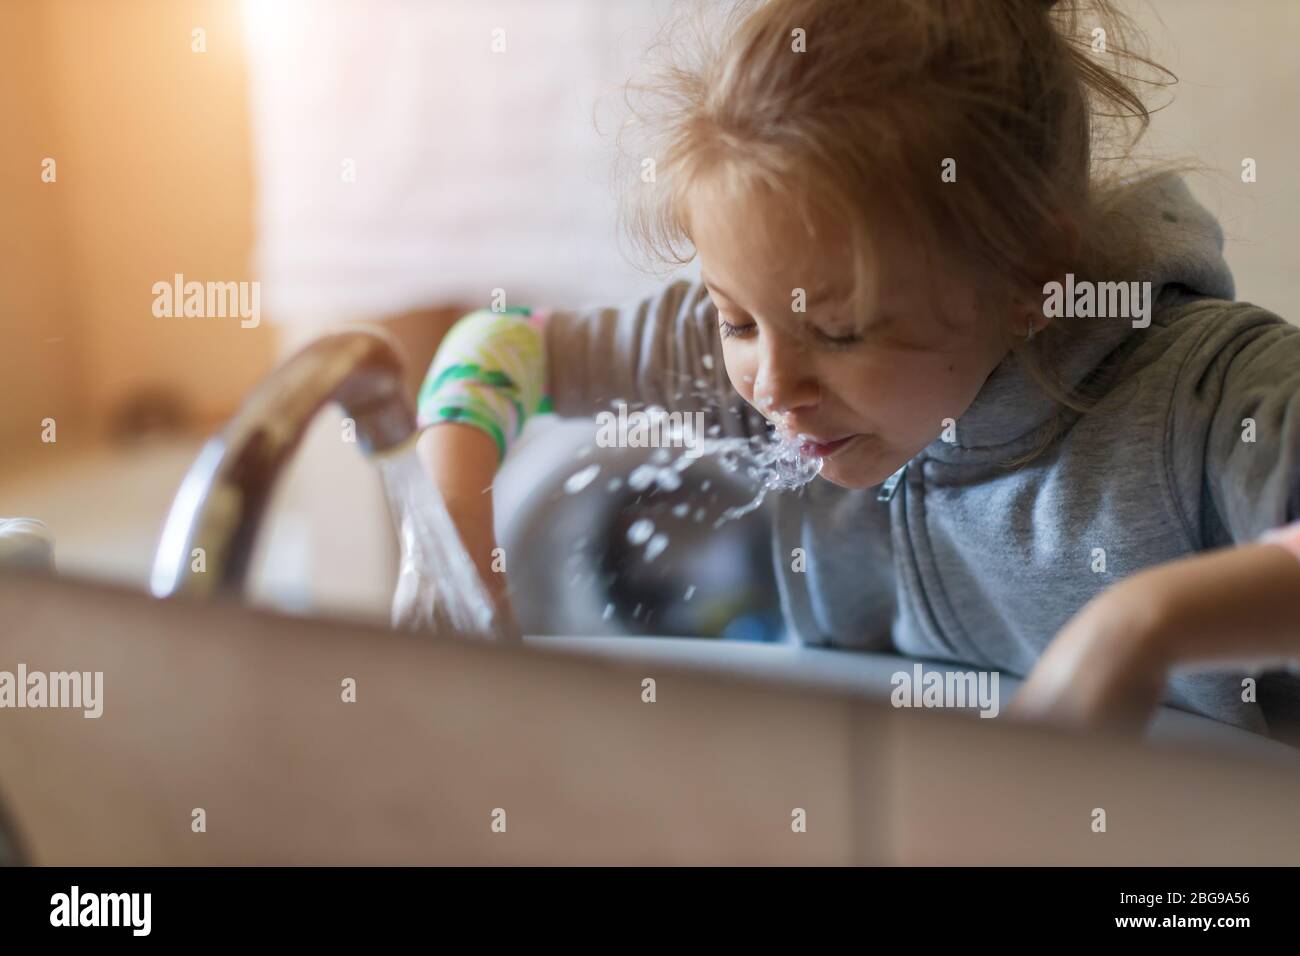 Cute little child girl rinses her mouth with water, looking at mirror and spits water into the sink Stock Photo